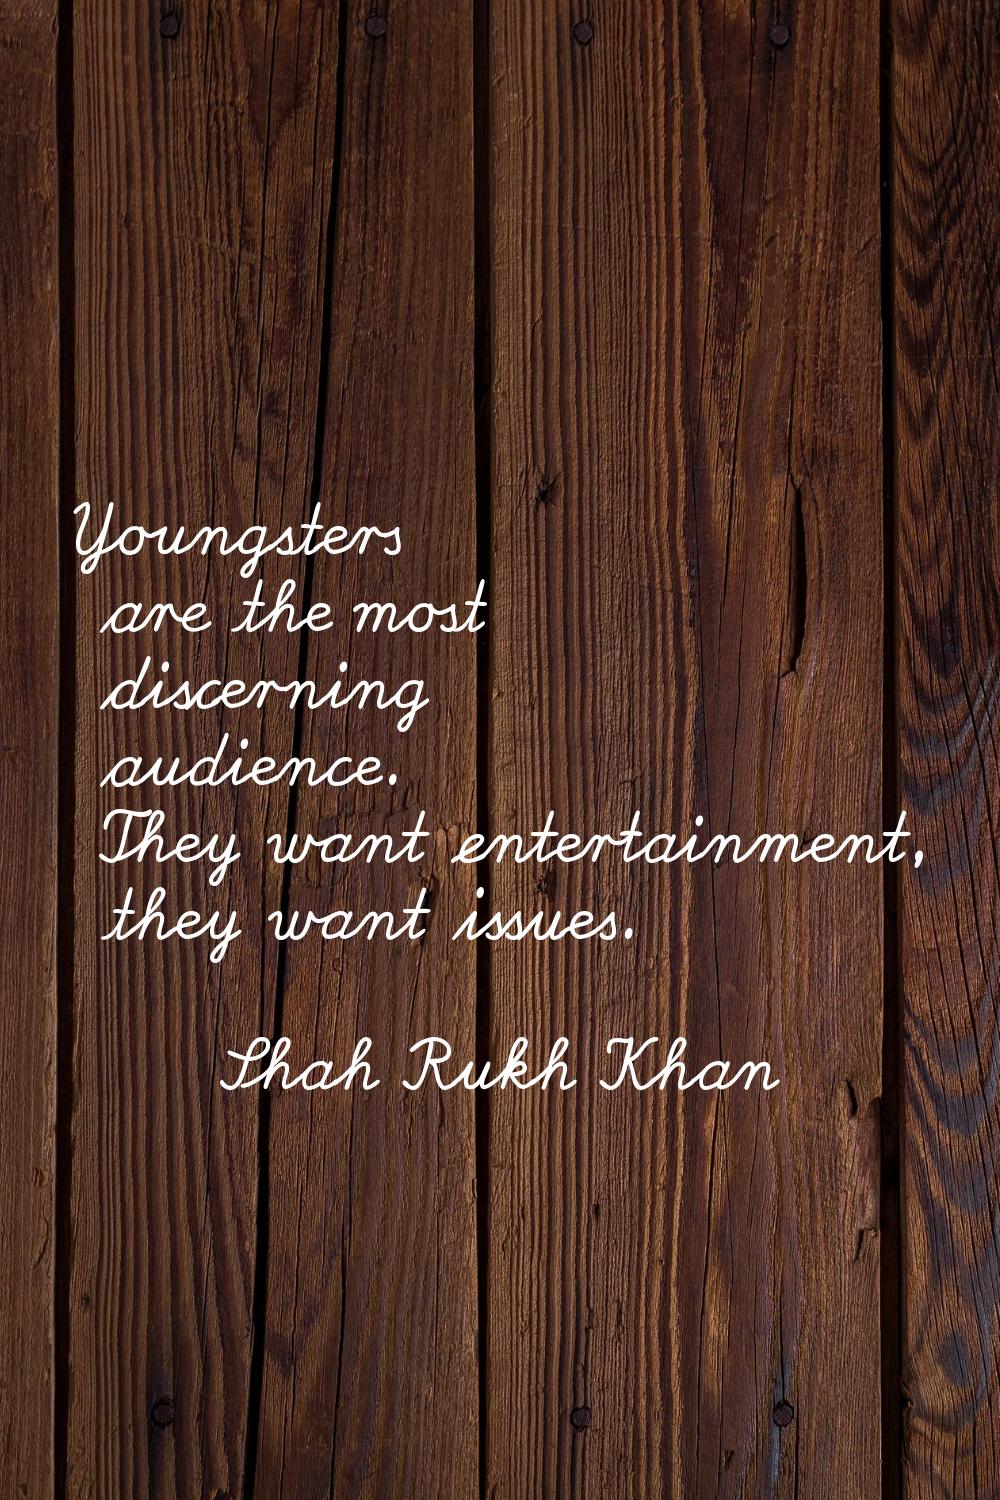 Youngsters are the most discerning audience. They want entertainment, they want issues.